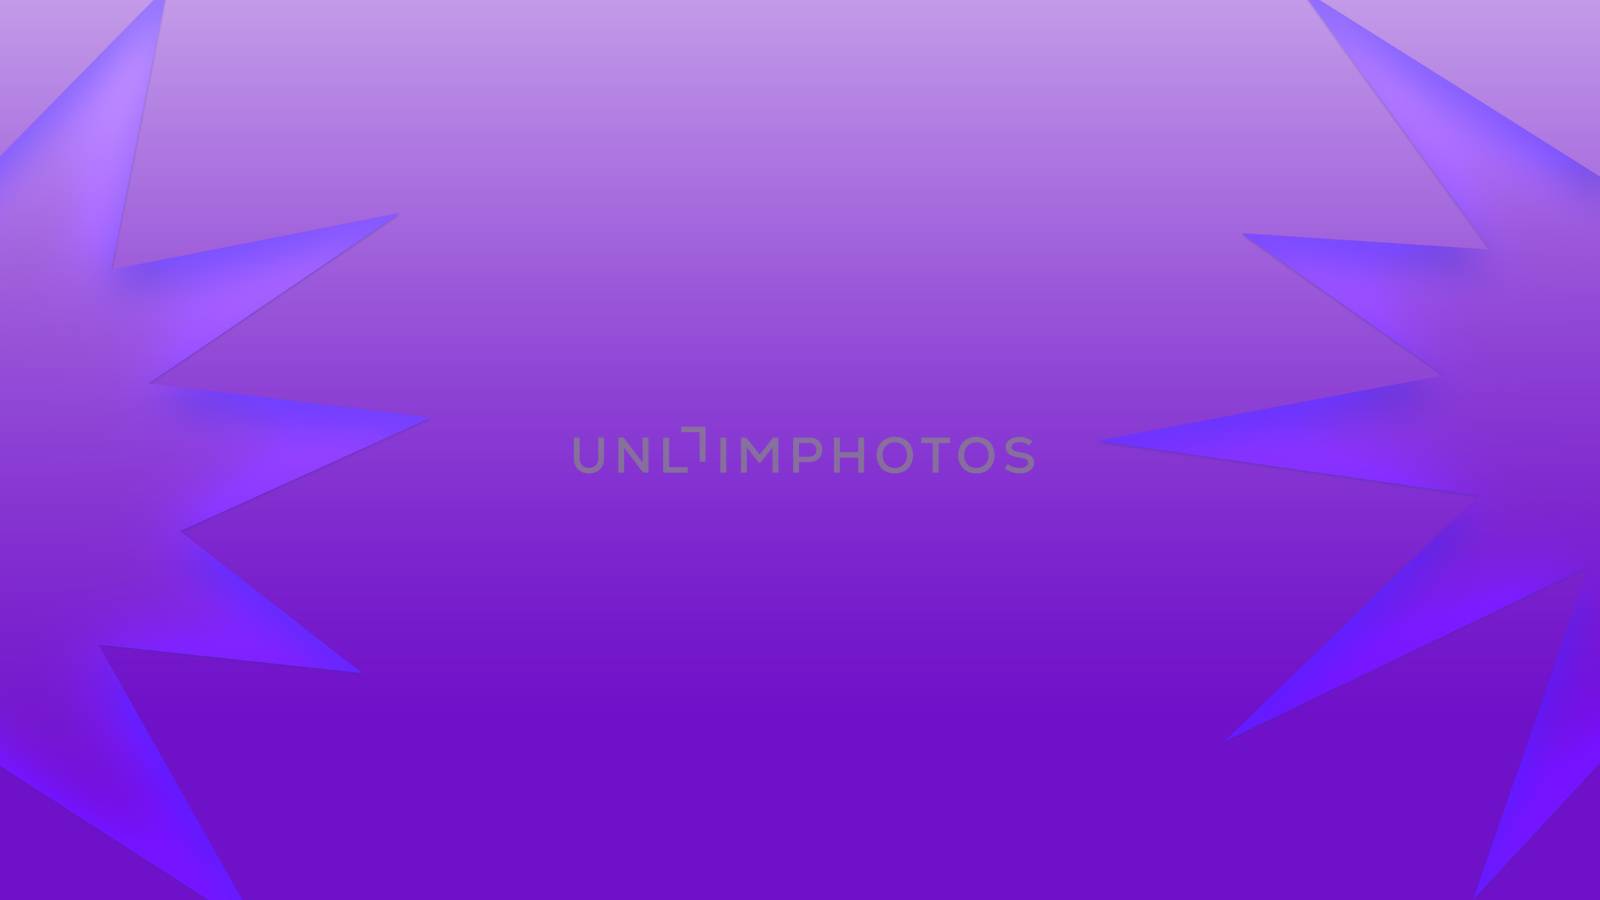 Purple neon gradient background with pointy soft 3d shapes on it. Illustration